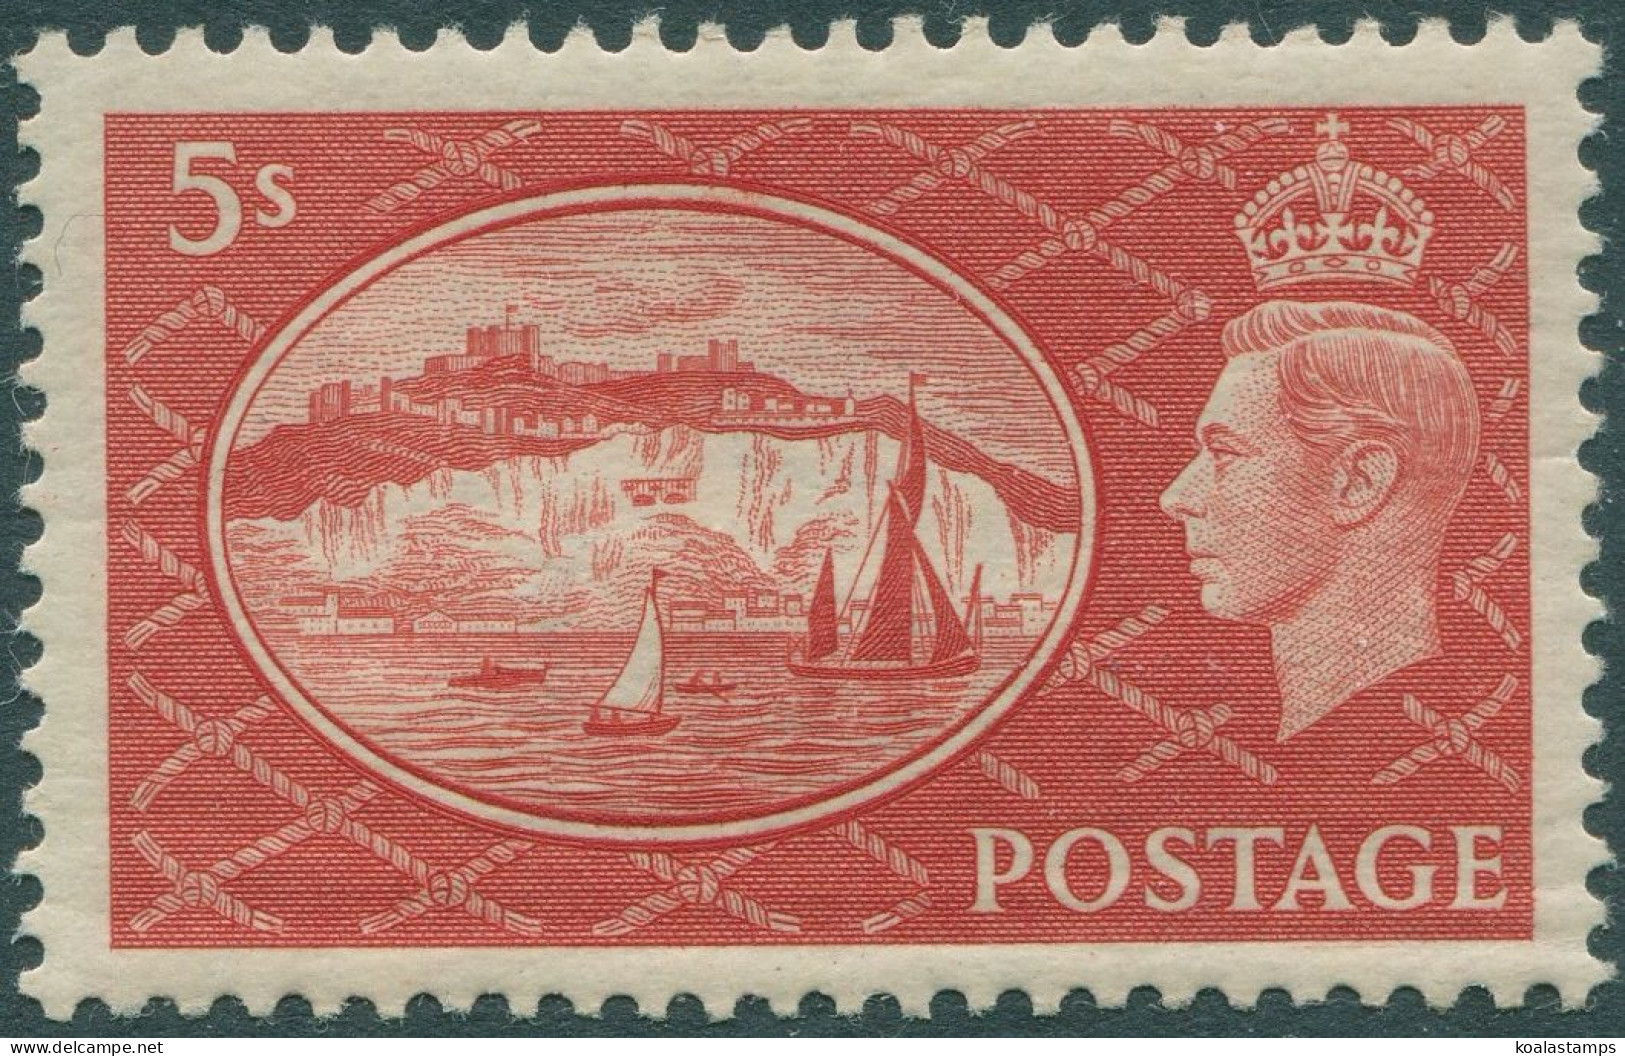 Great Britain 1951 SG510 5/- Red White Cliffs Of Dover KGVI MH - Unclassified